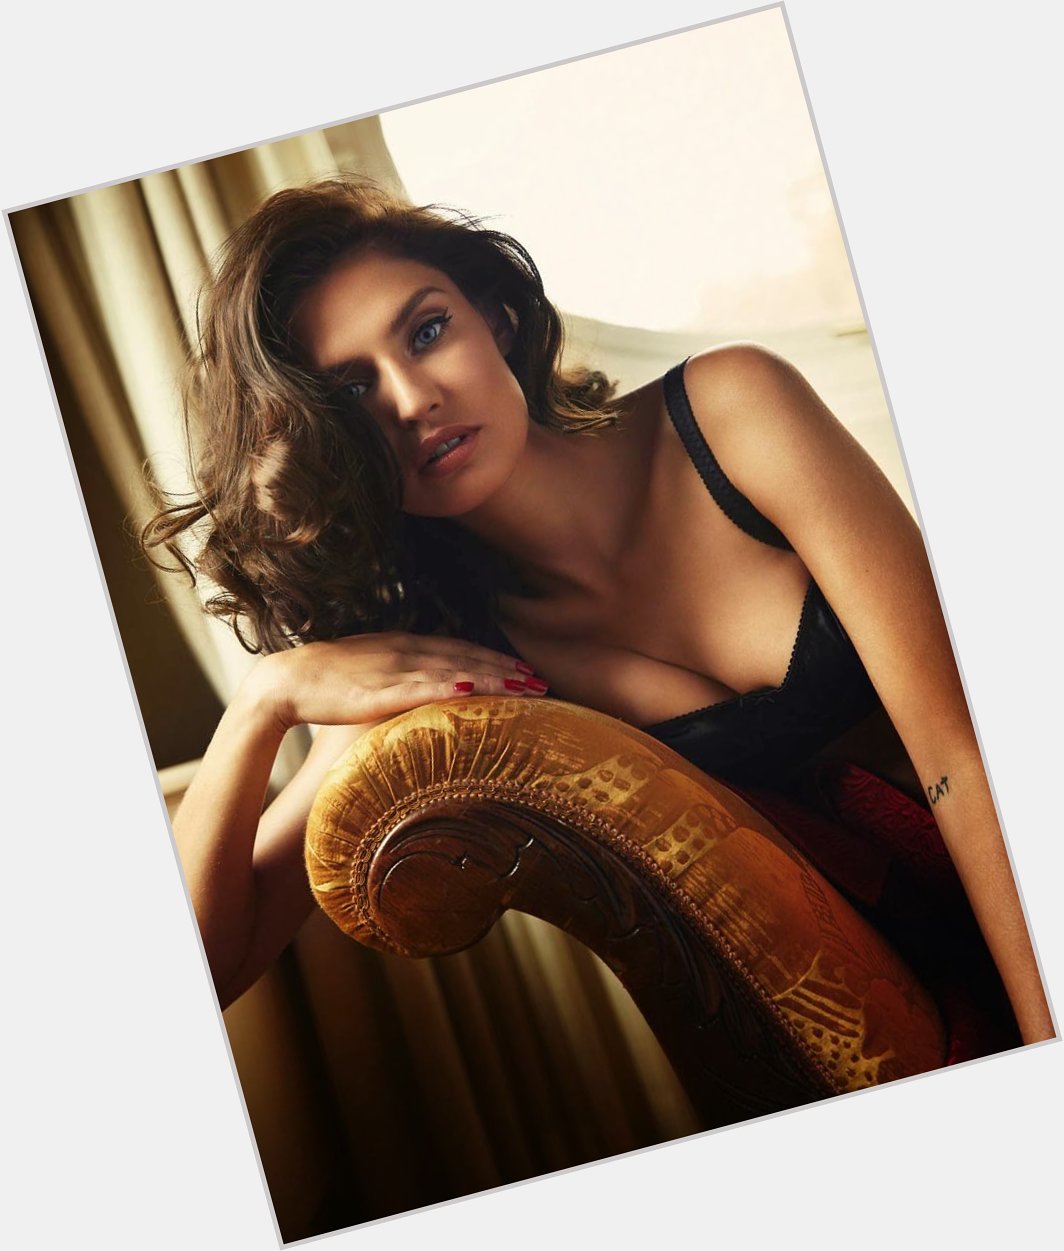 A very Happy Birthday to Bianca Balti who ranks on our Global Fashion Model List  